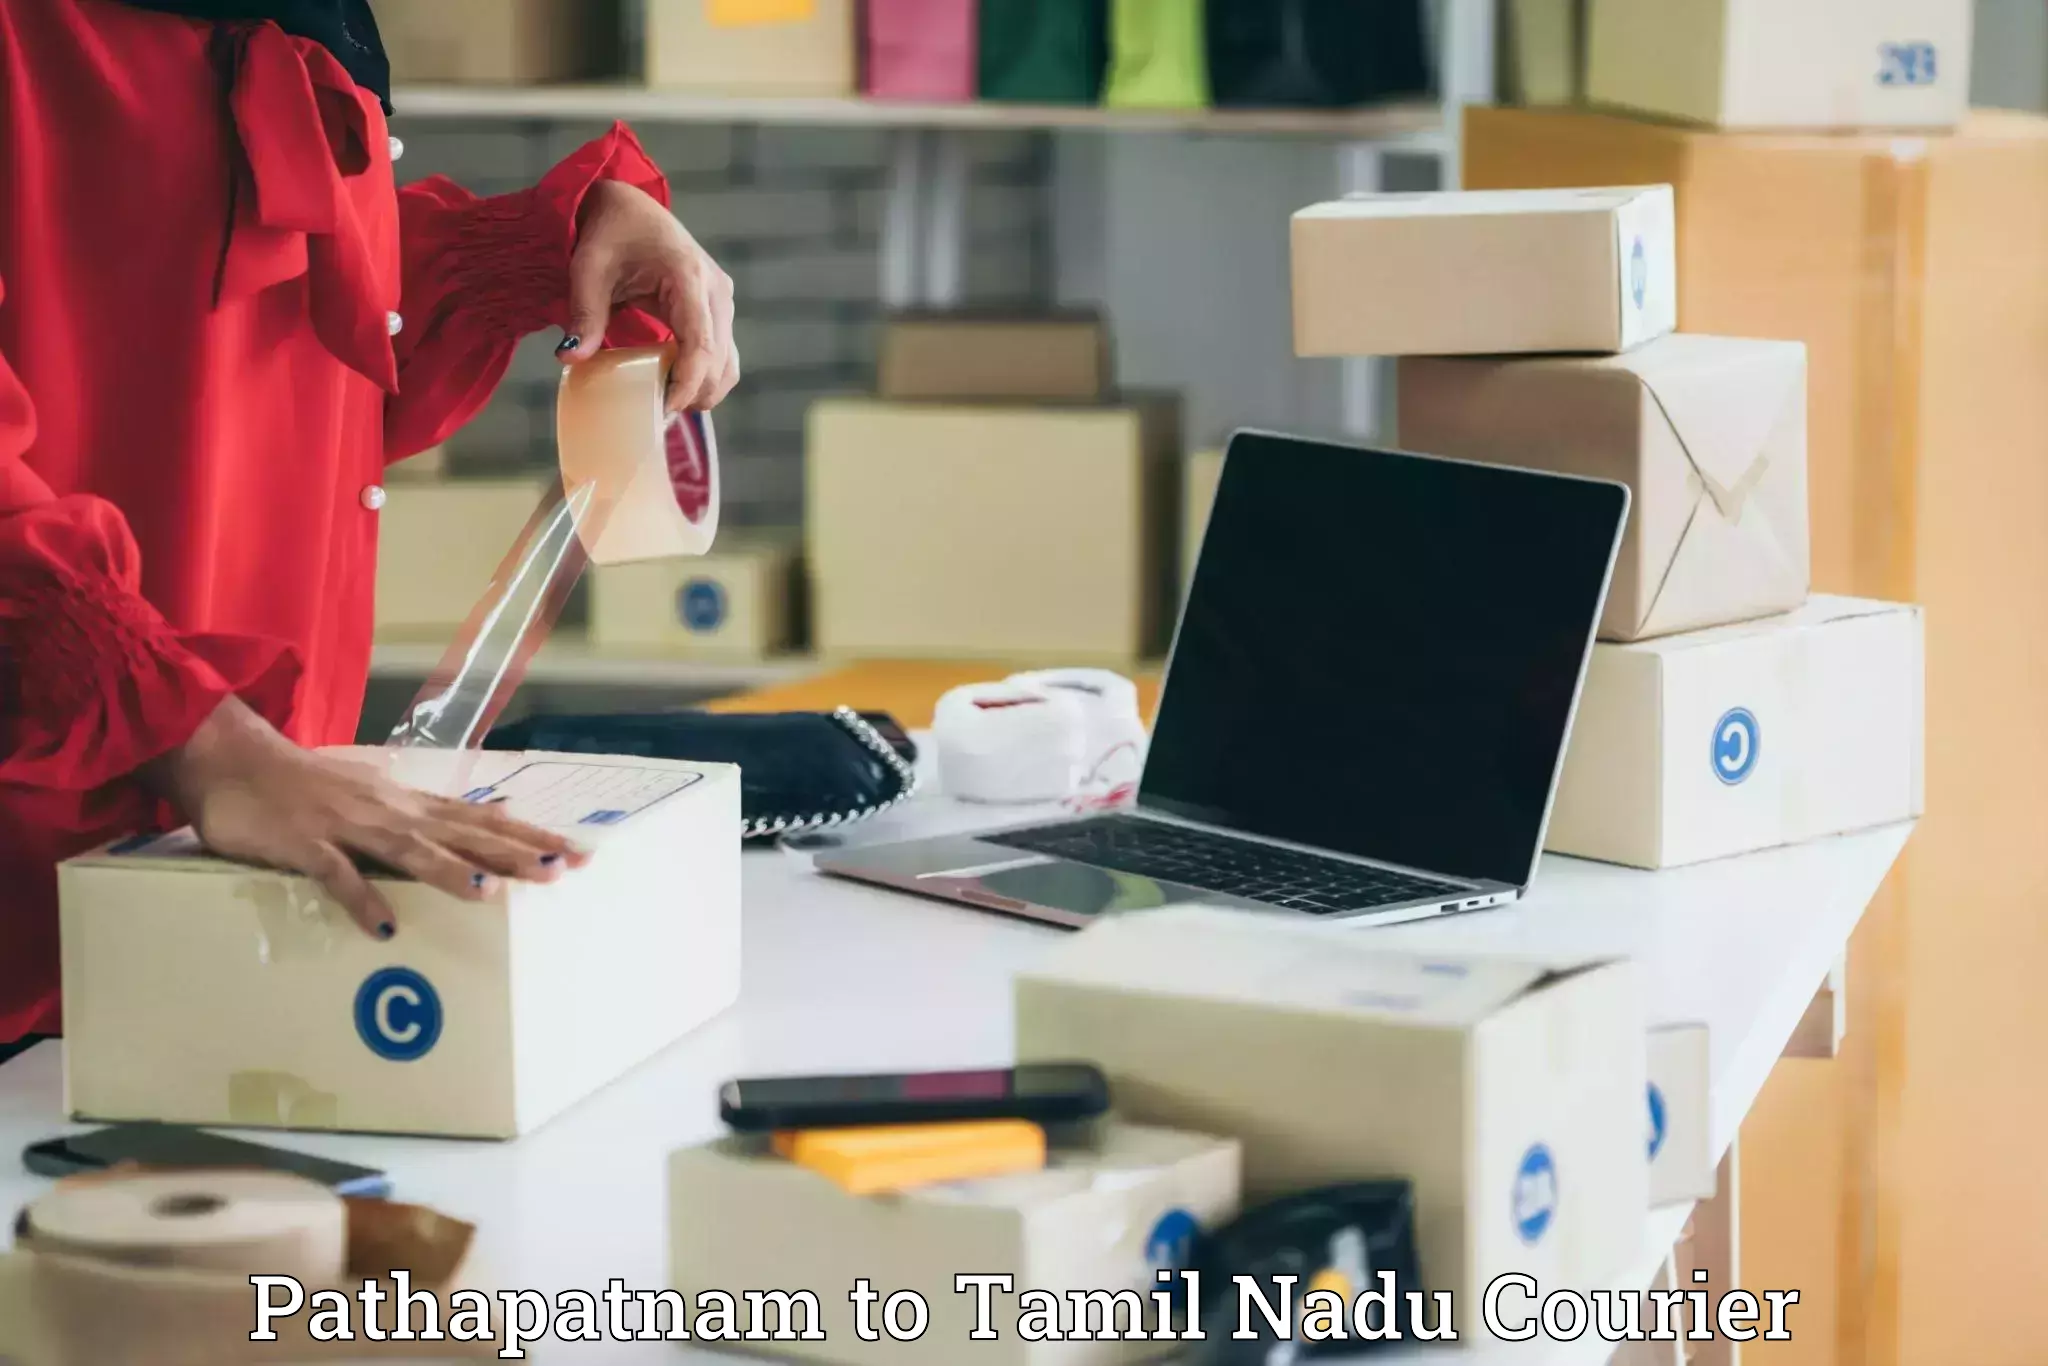 User-friendly delivery service Pathapatnam to Tamil Nadu